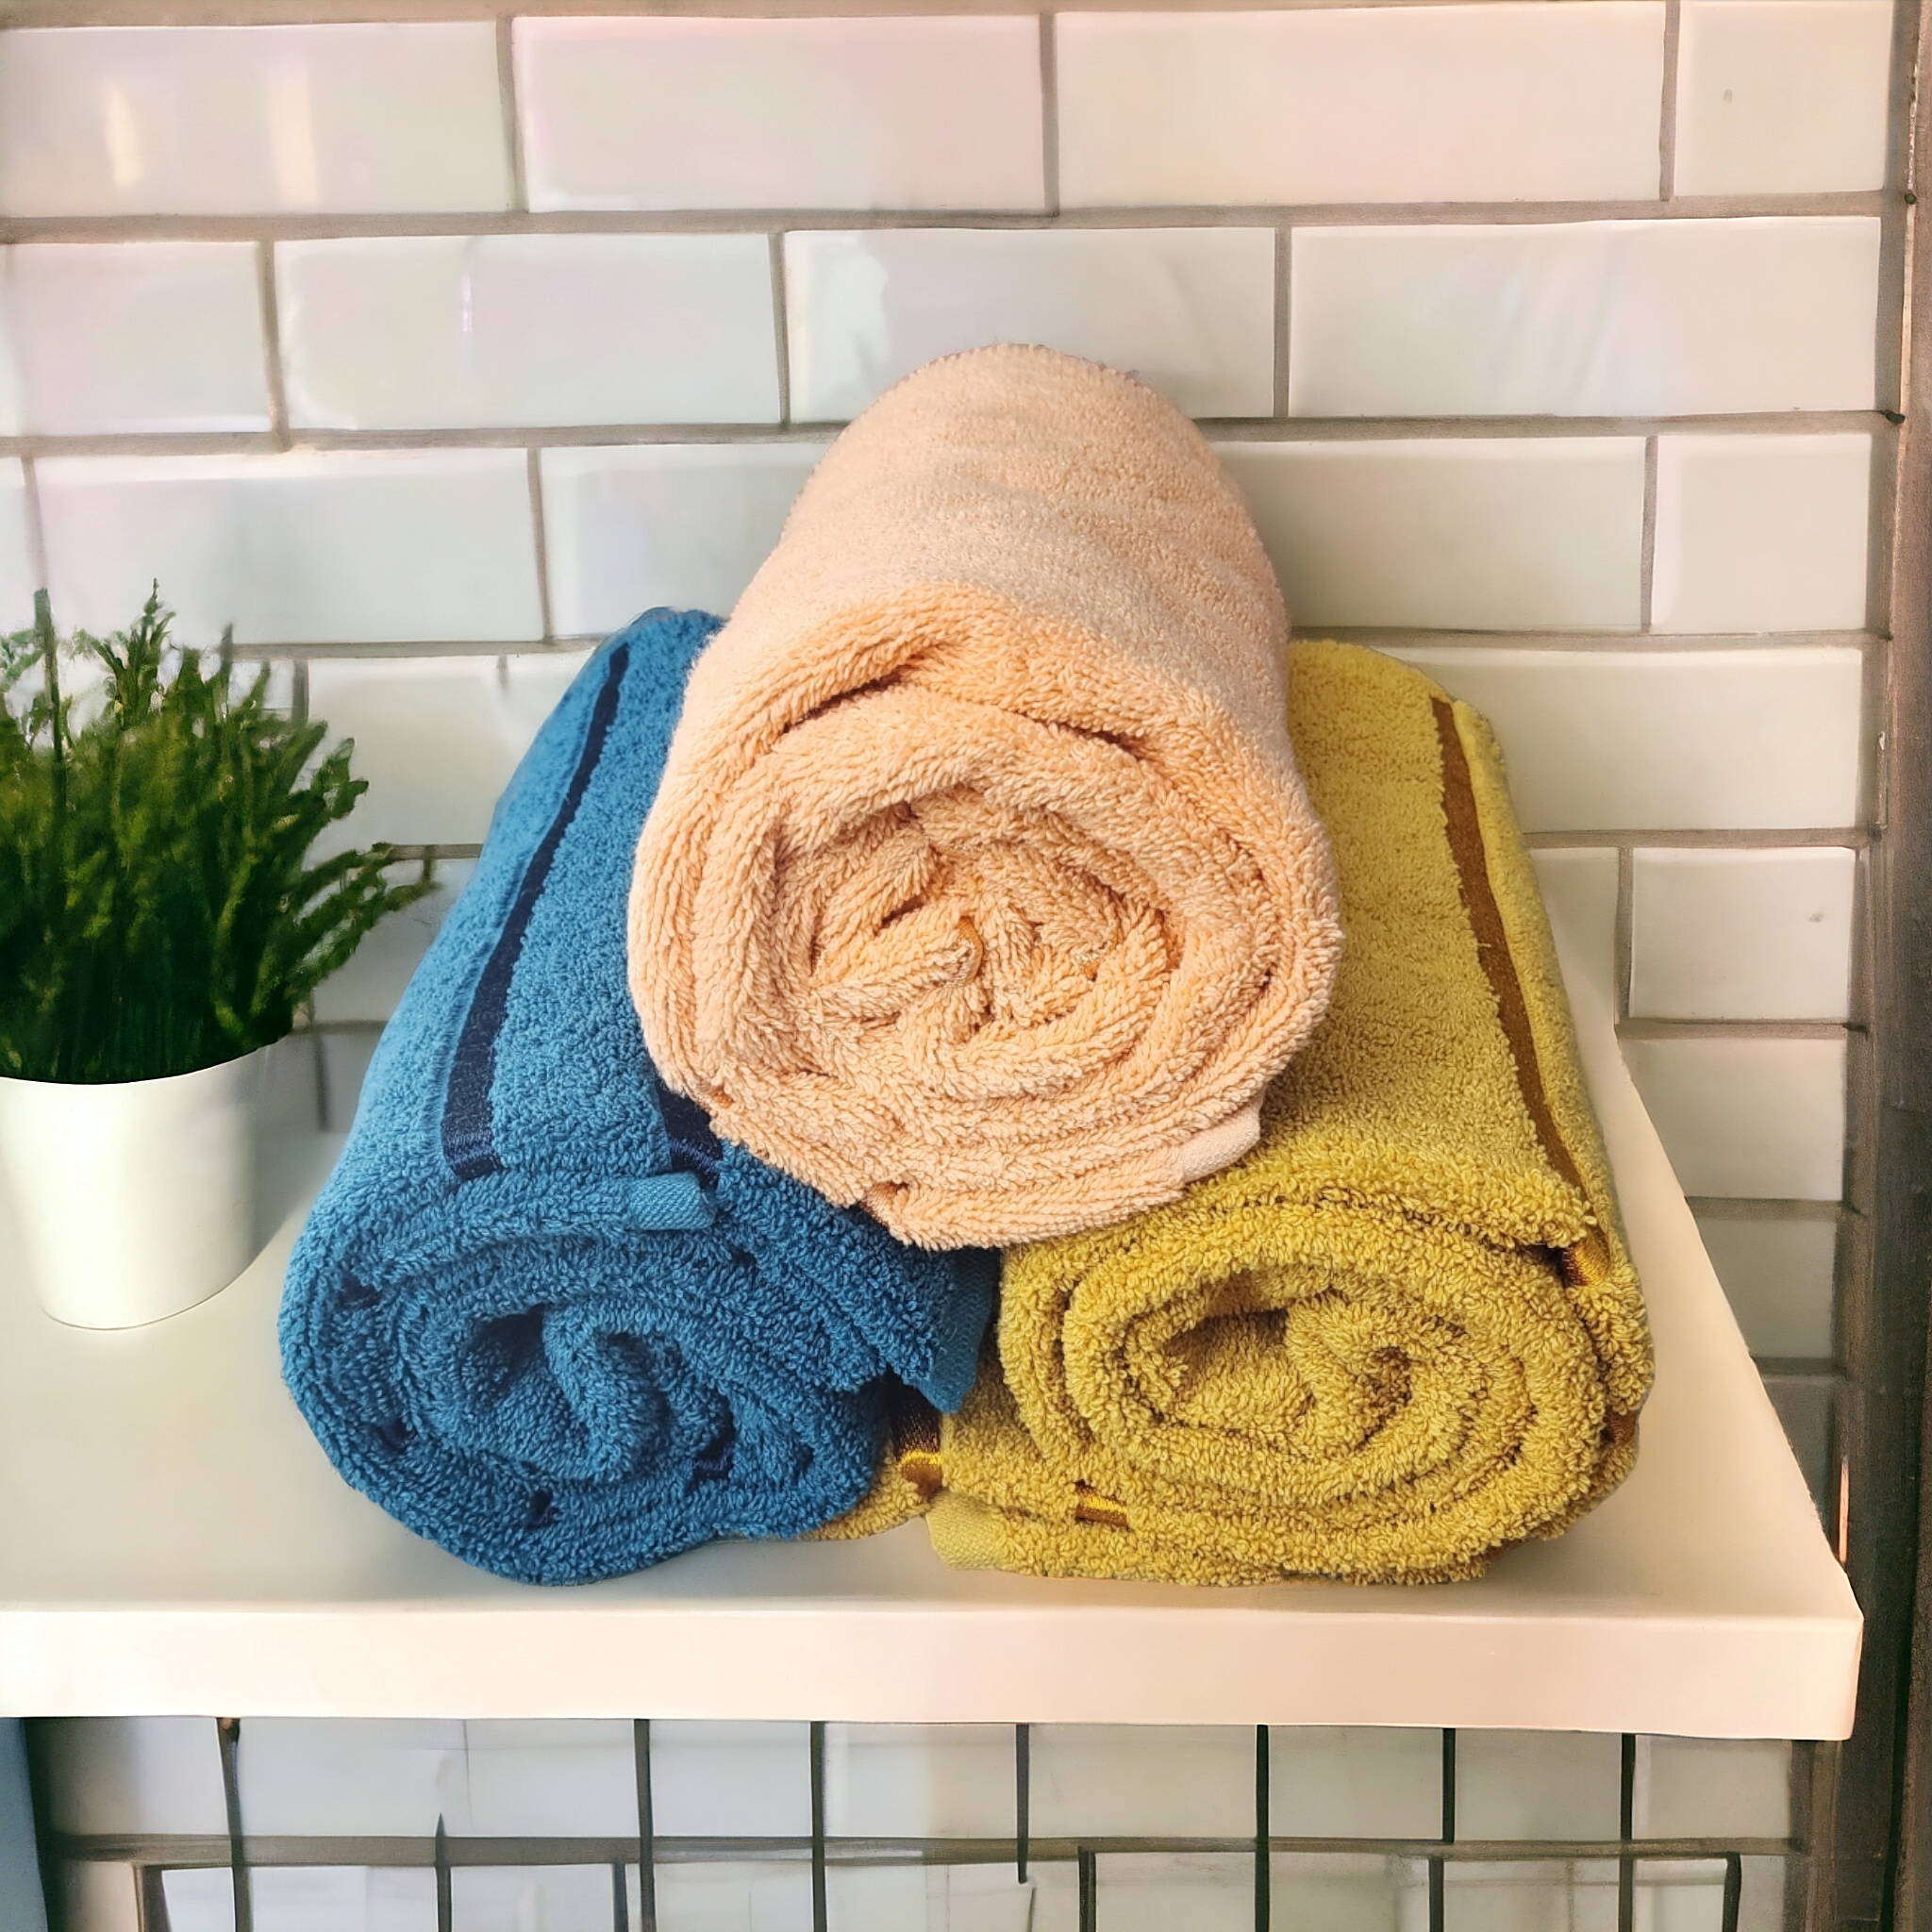 PACK OF 3 TOWELS